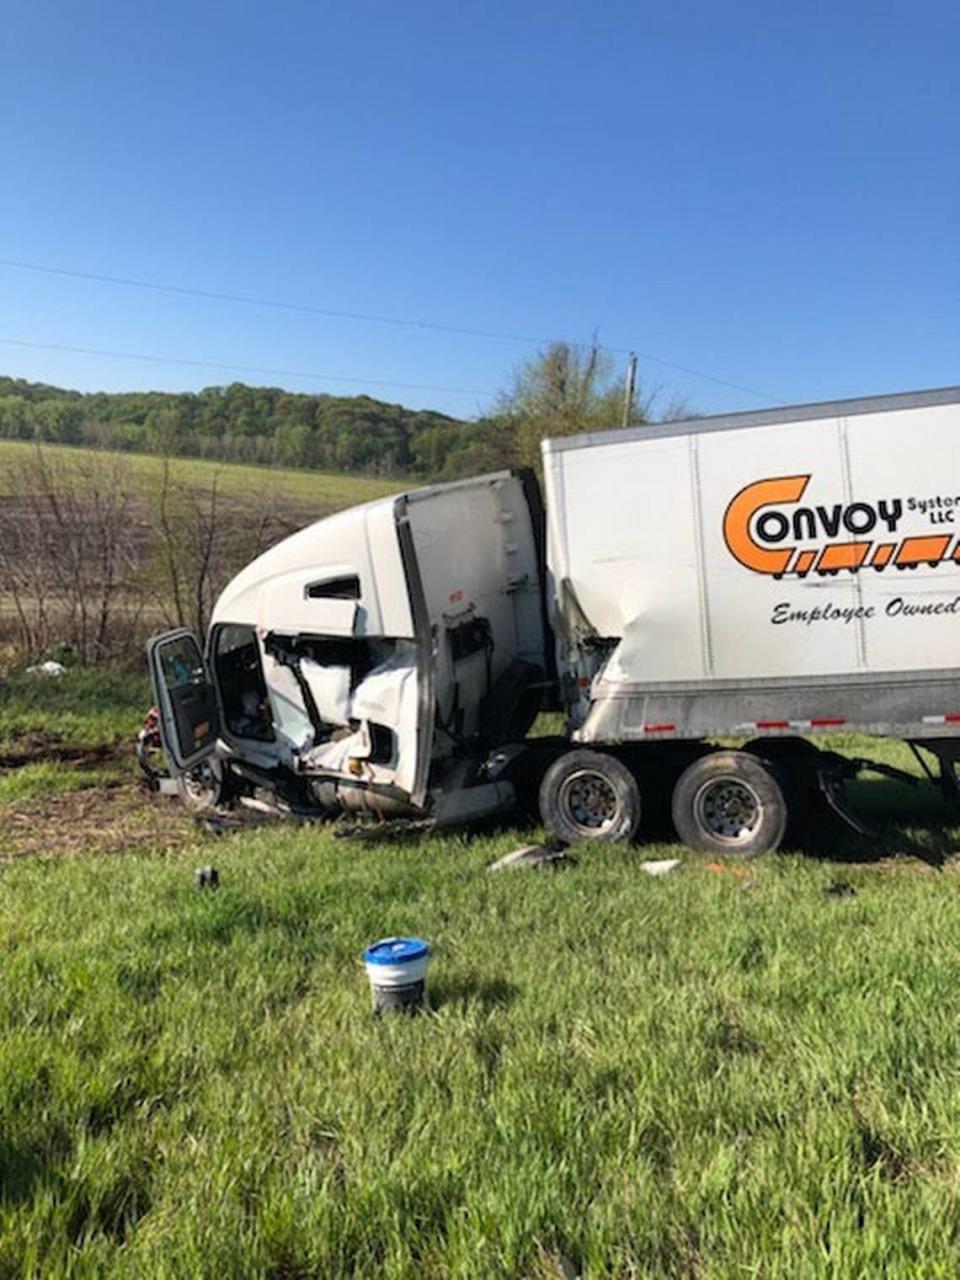 The driver of a utility truck was critically injured Friday morning when the truck collided with a semitruck along Interstate 435 in Kansas City, Kansas.